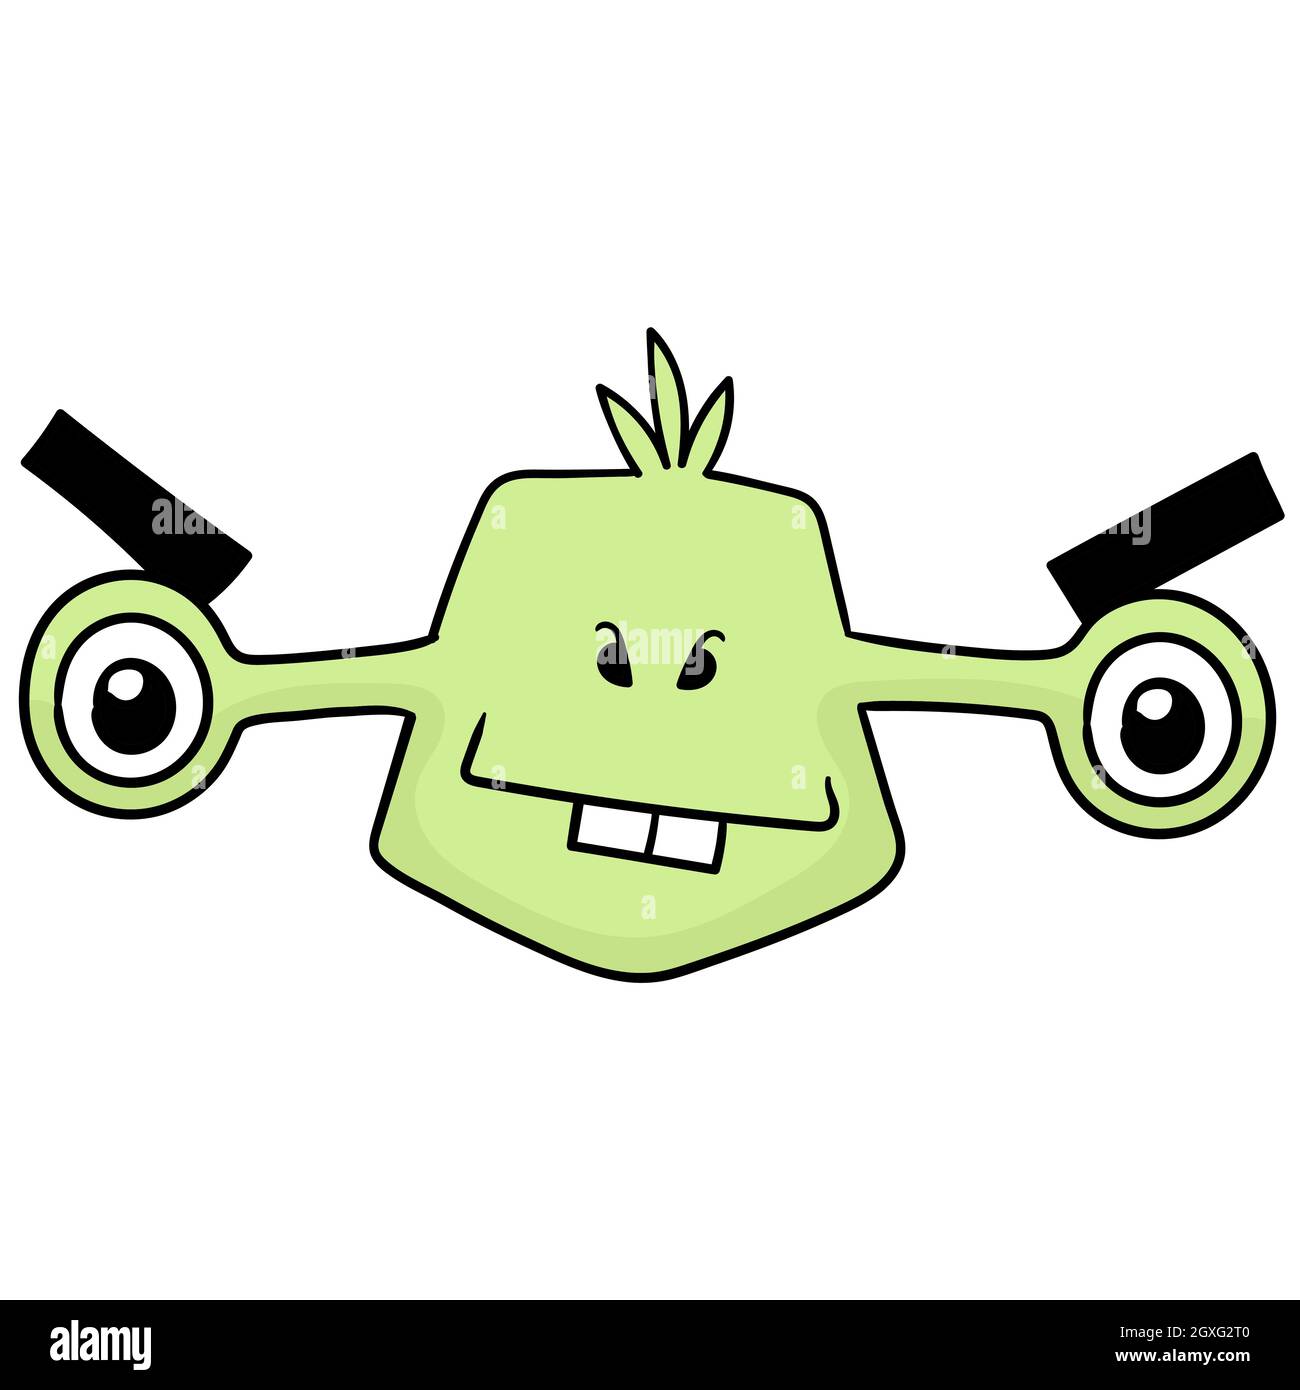 the head of a cute monster with a strange face with big eyes Stock Vector